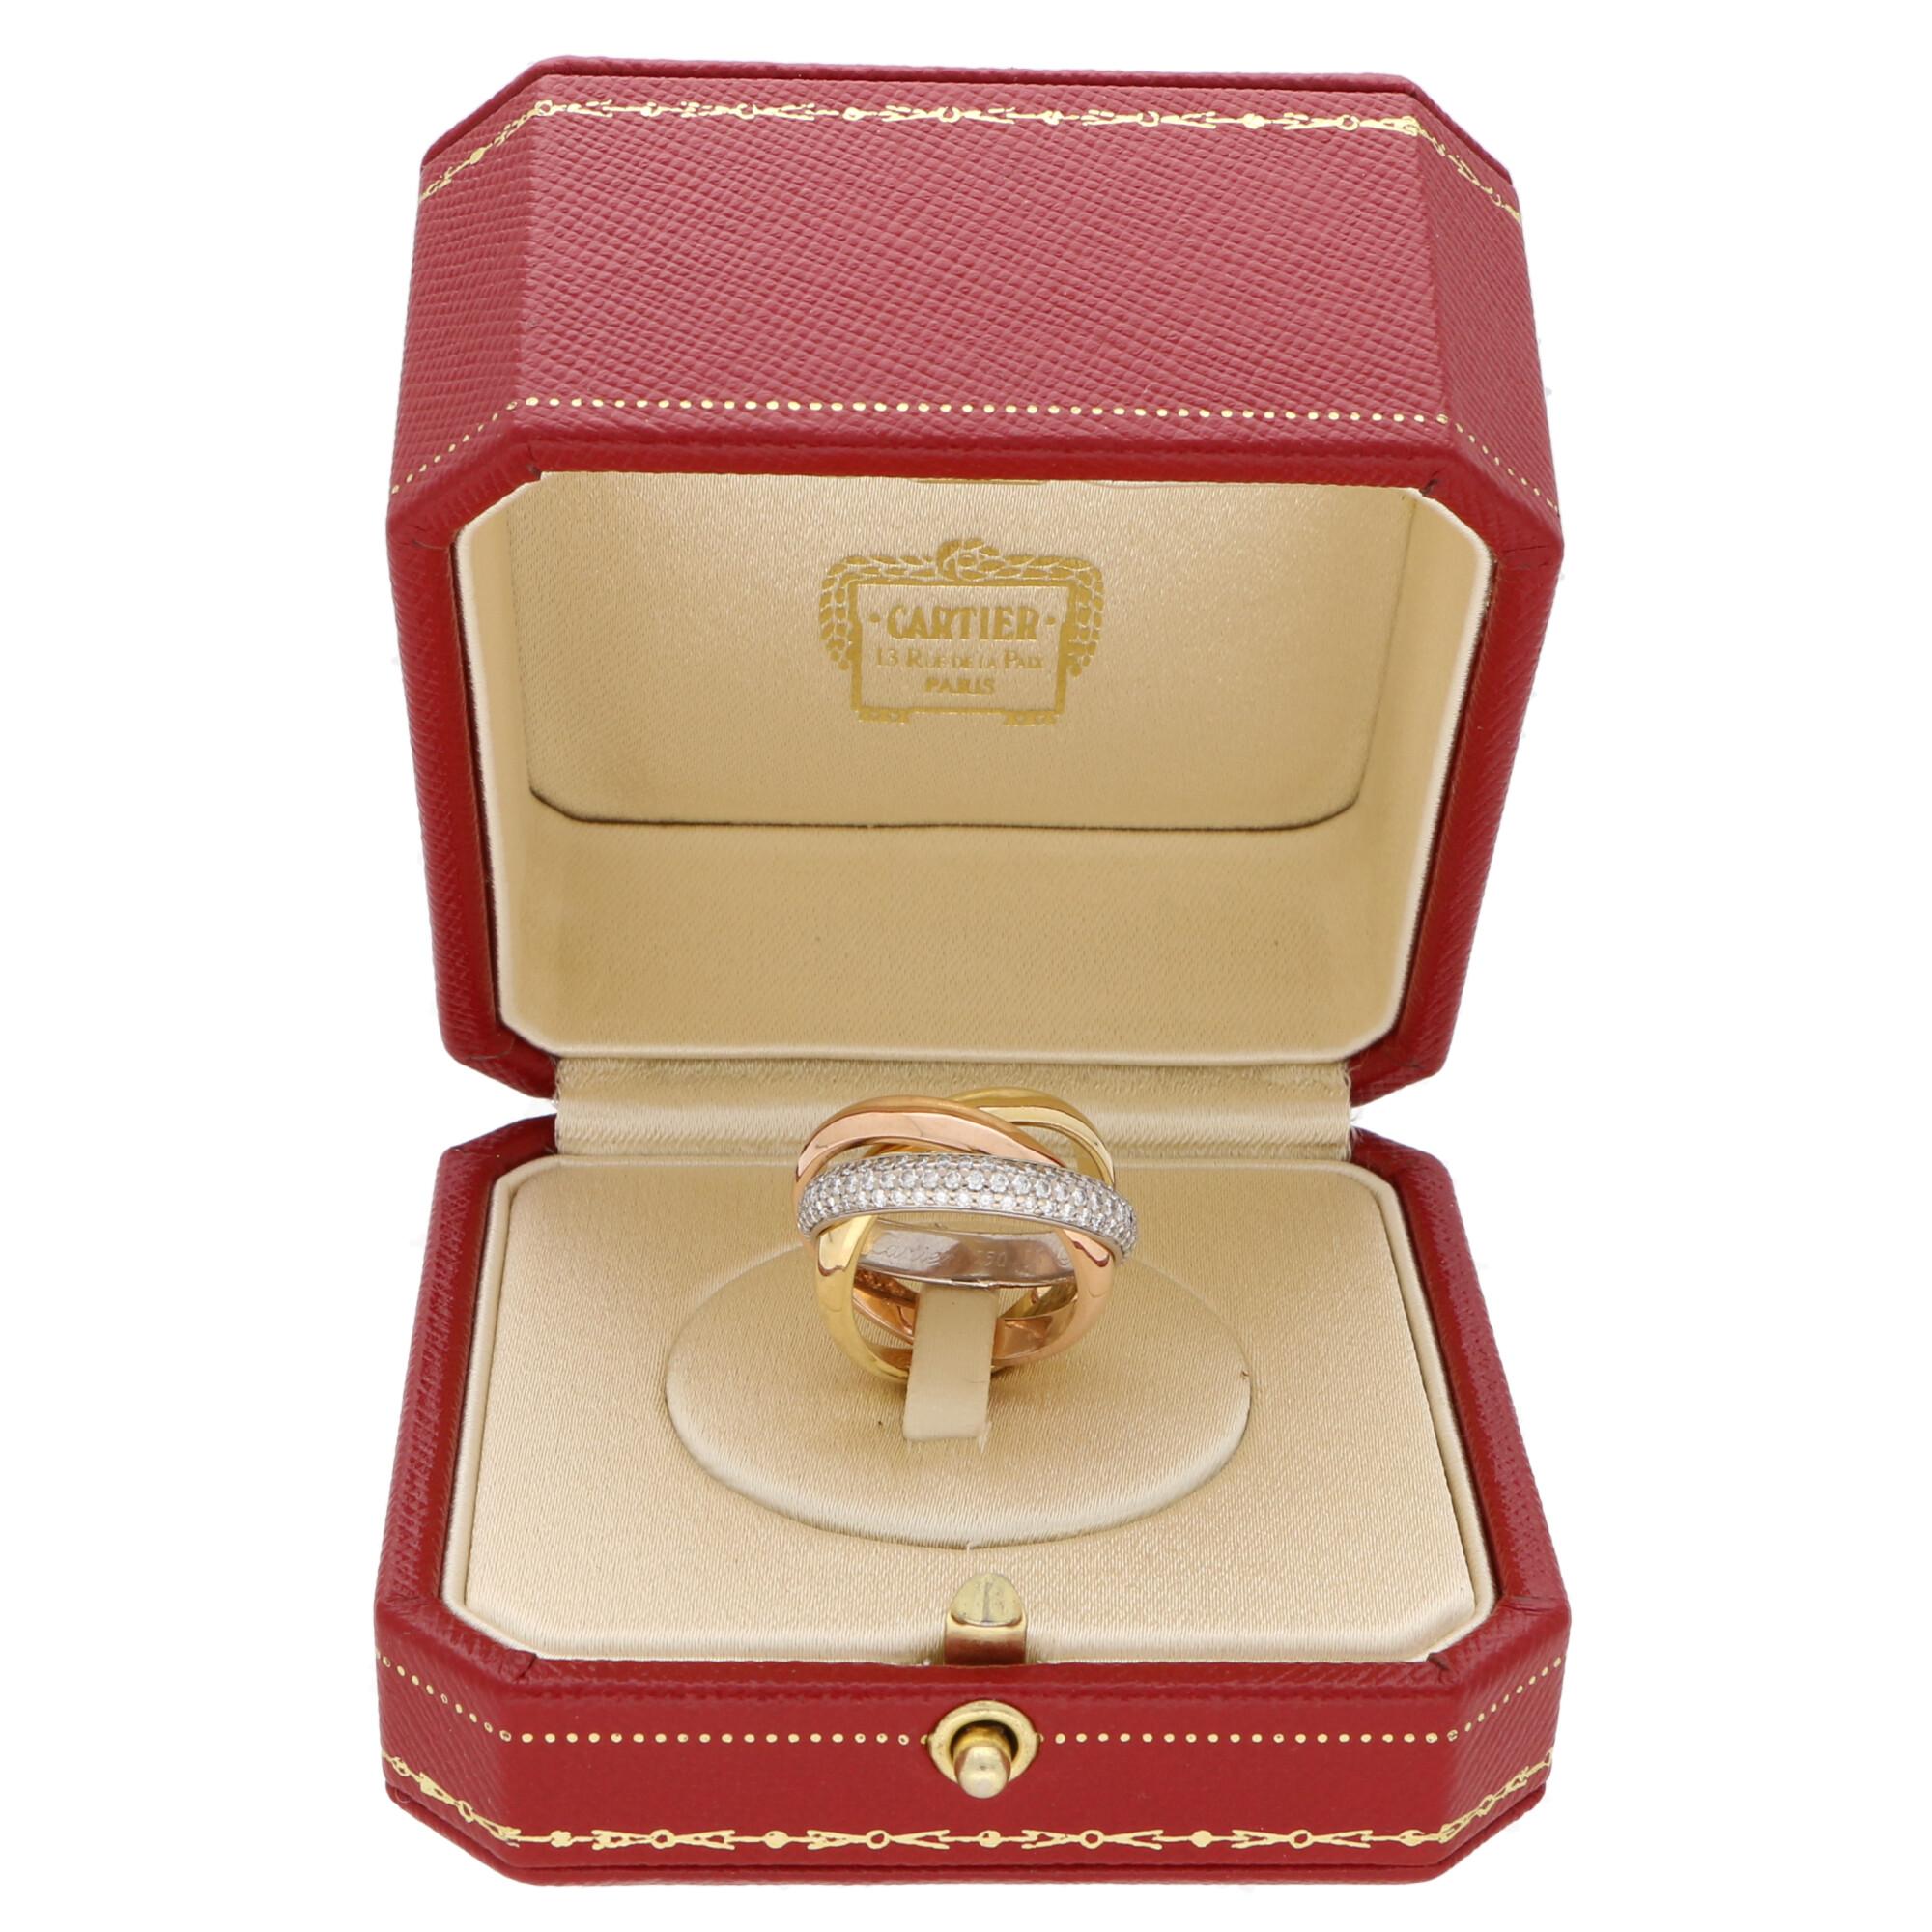 A classic Cartier diamond trinity ring set in 18k yellow, rose and white gold.

The ring is composed of three interlinked 4-millimetre bands that are designed to roll with ease on the finger. The colour difference is subtle yet beautiful and the